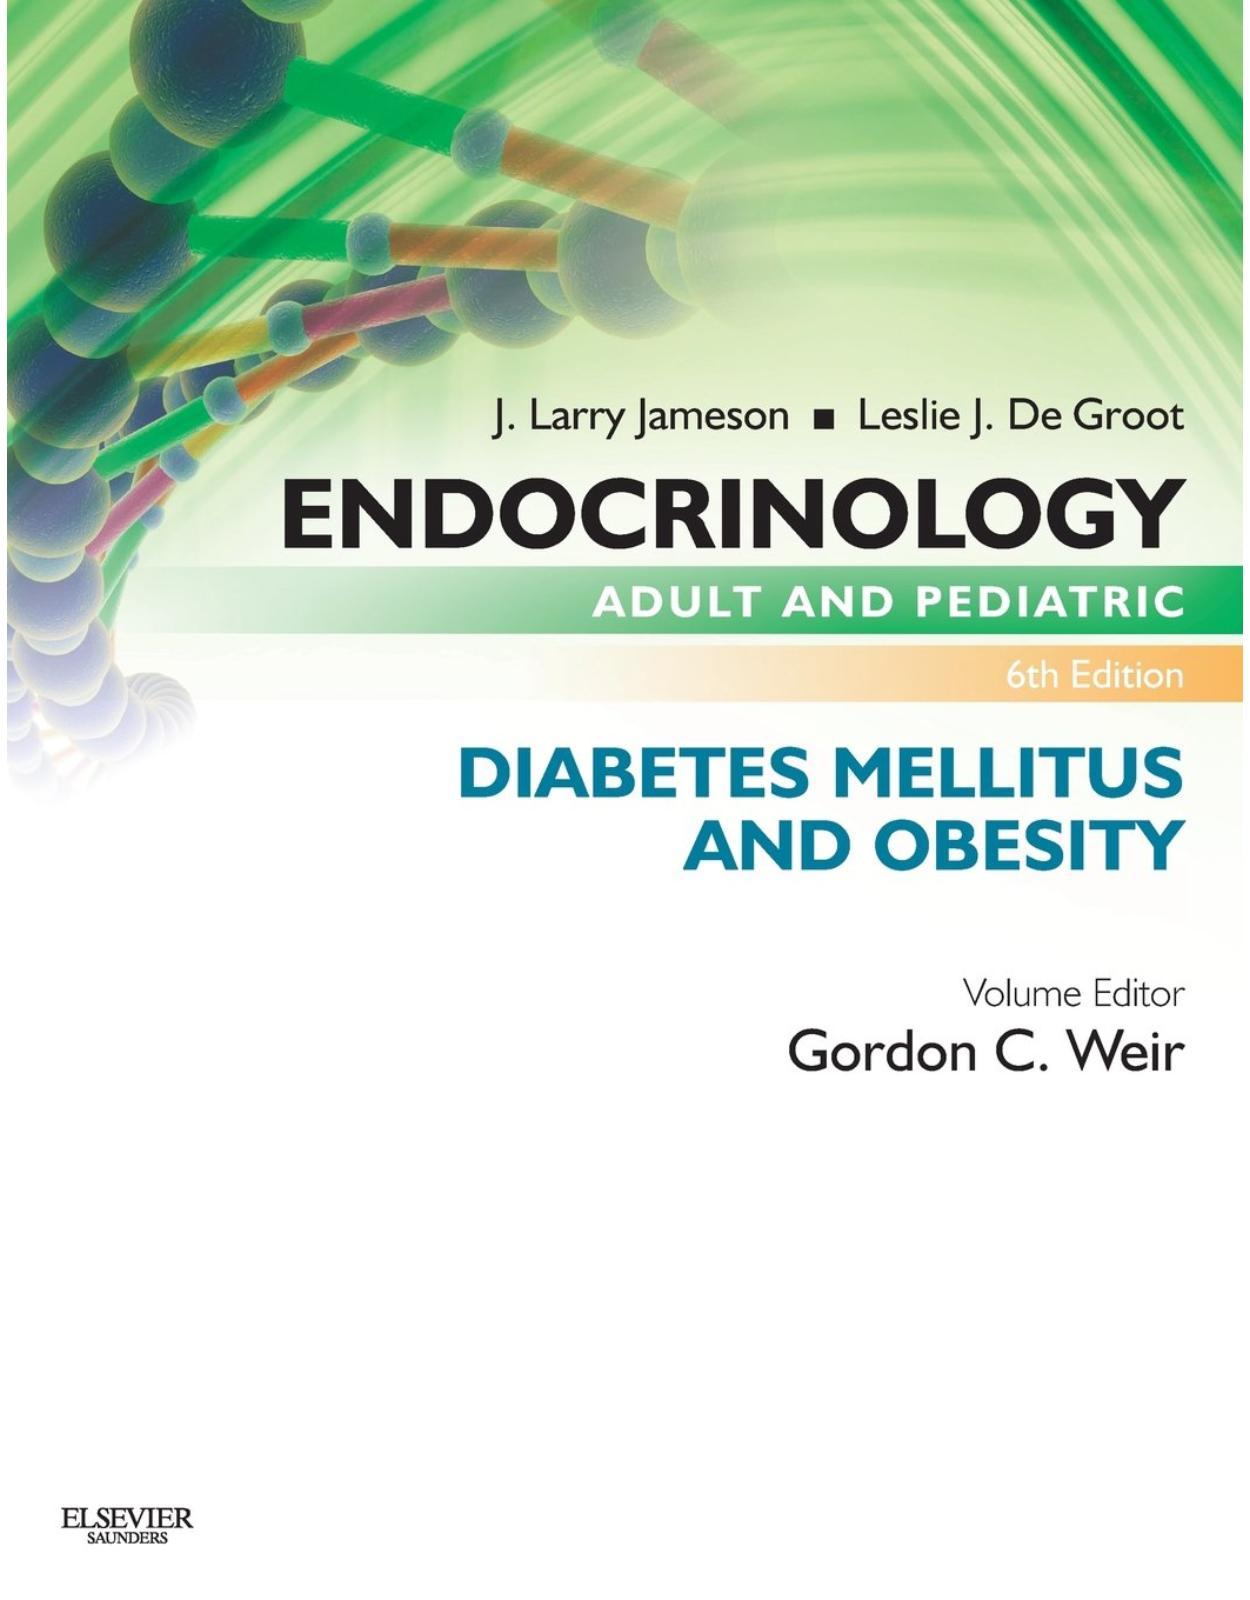 Endocrinology Adult and Pediatric: Diabetes Mellitus and Obesity, 6th Edition